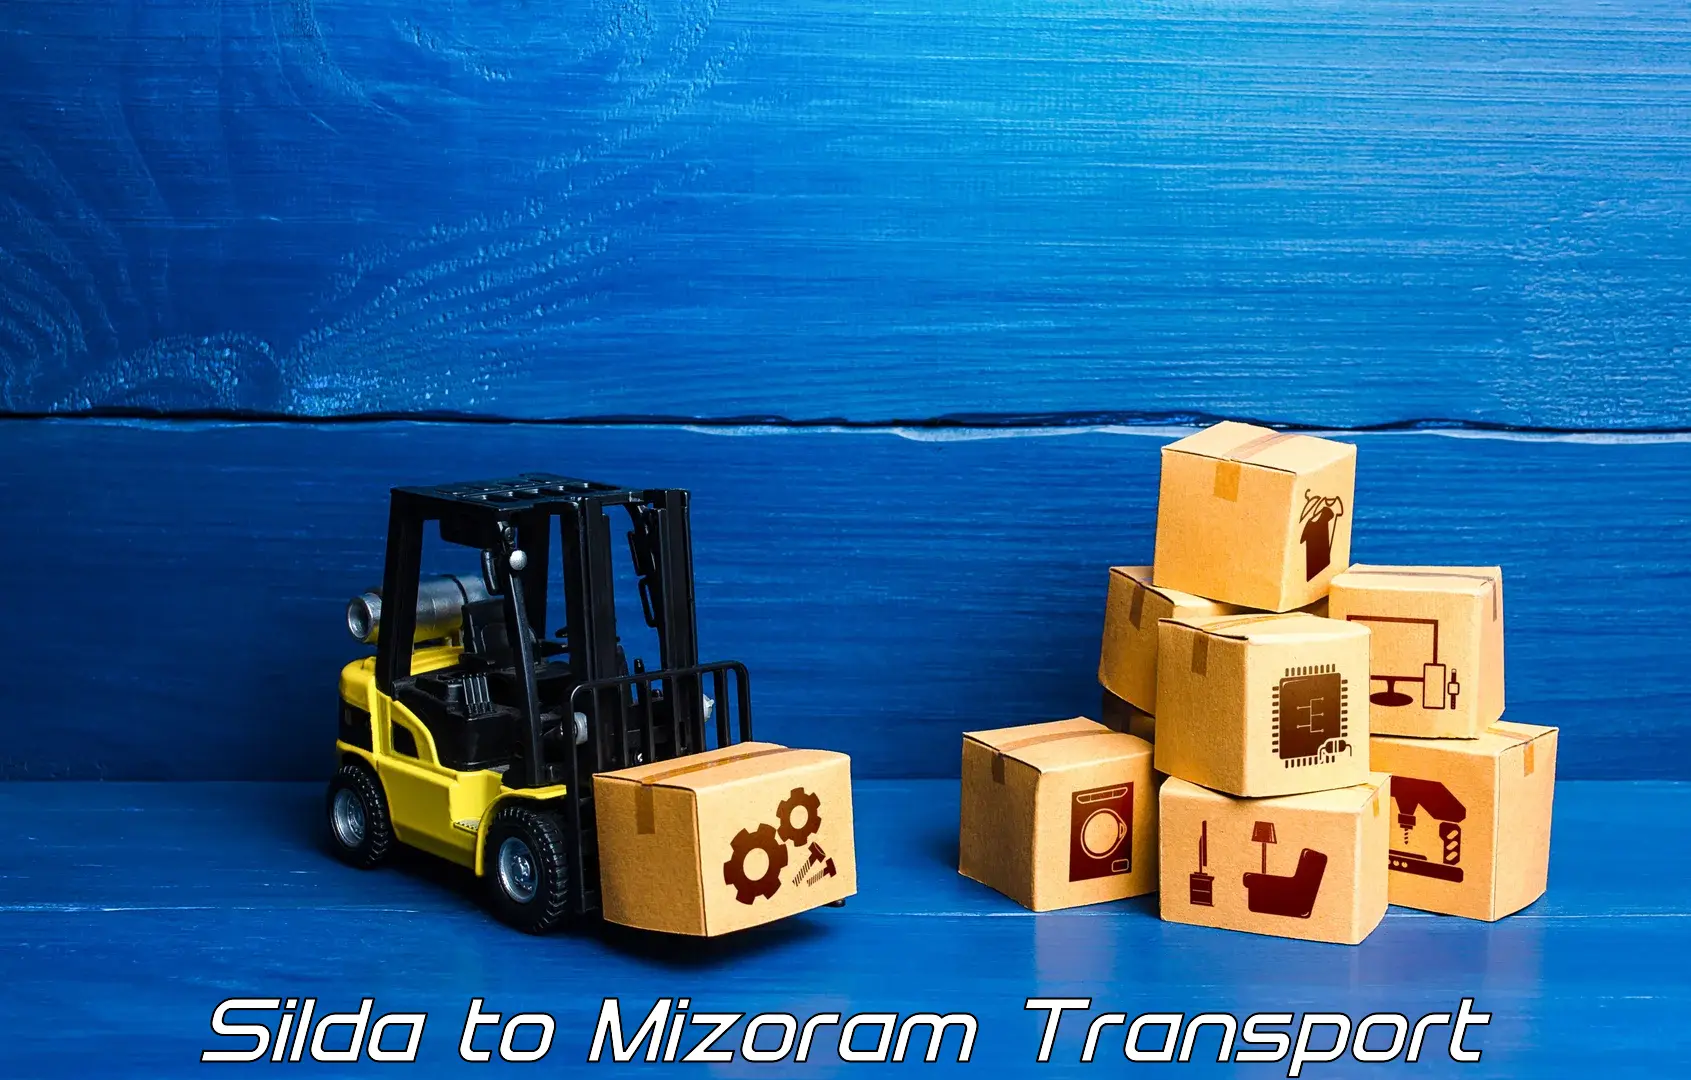 Transport bike from one state to another Silda to Mizoram